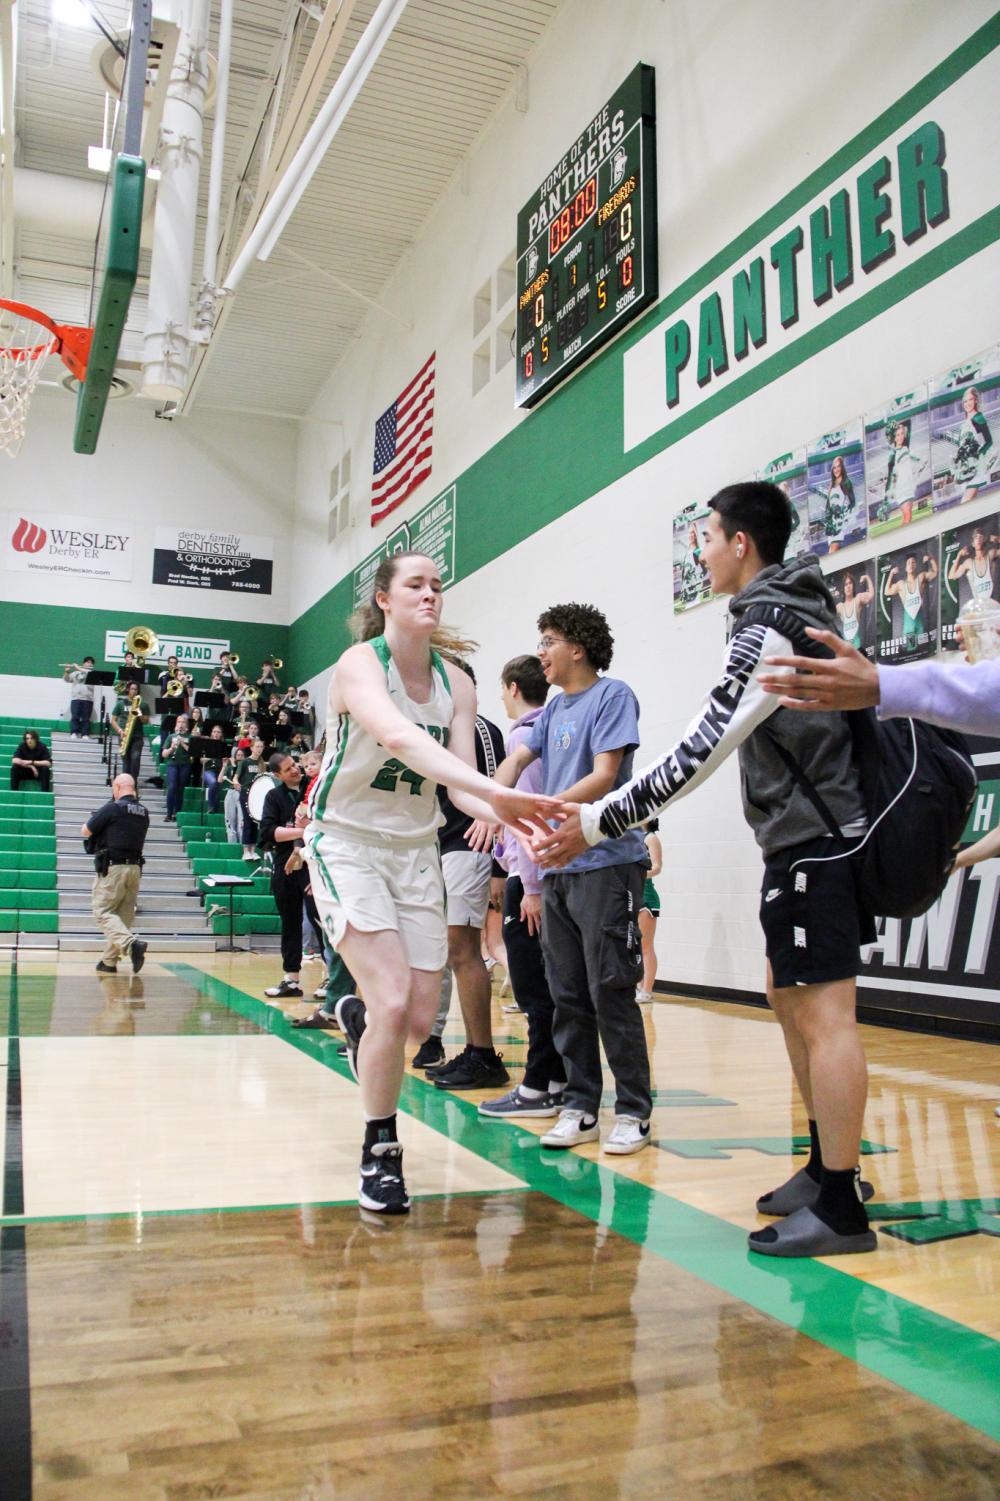 Girls+basketball+sub-state+semi+finals+V.+Lawrence+Free+State+%28Photos+by+Sophia+Edmonson%29